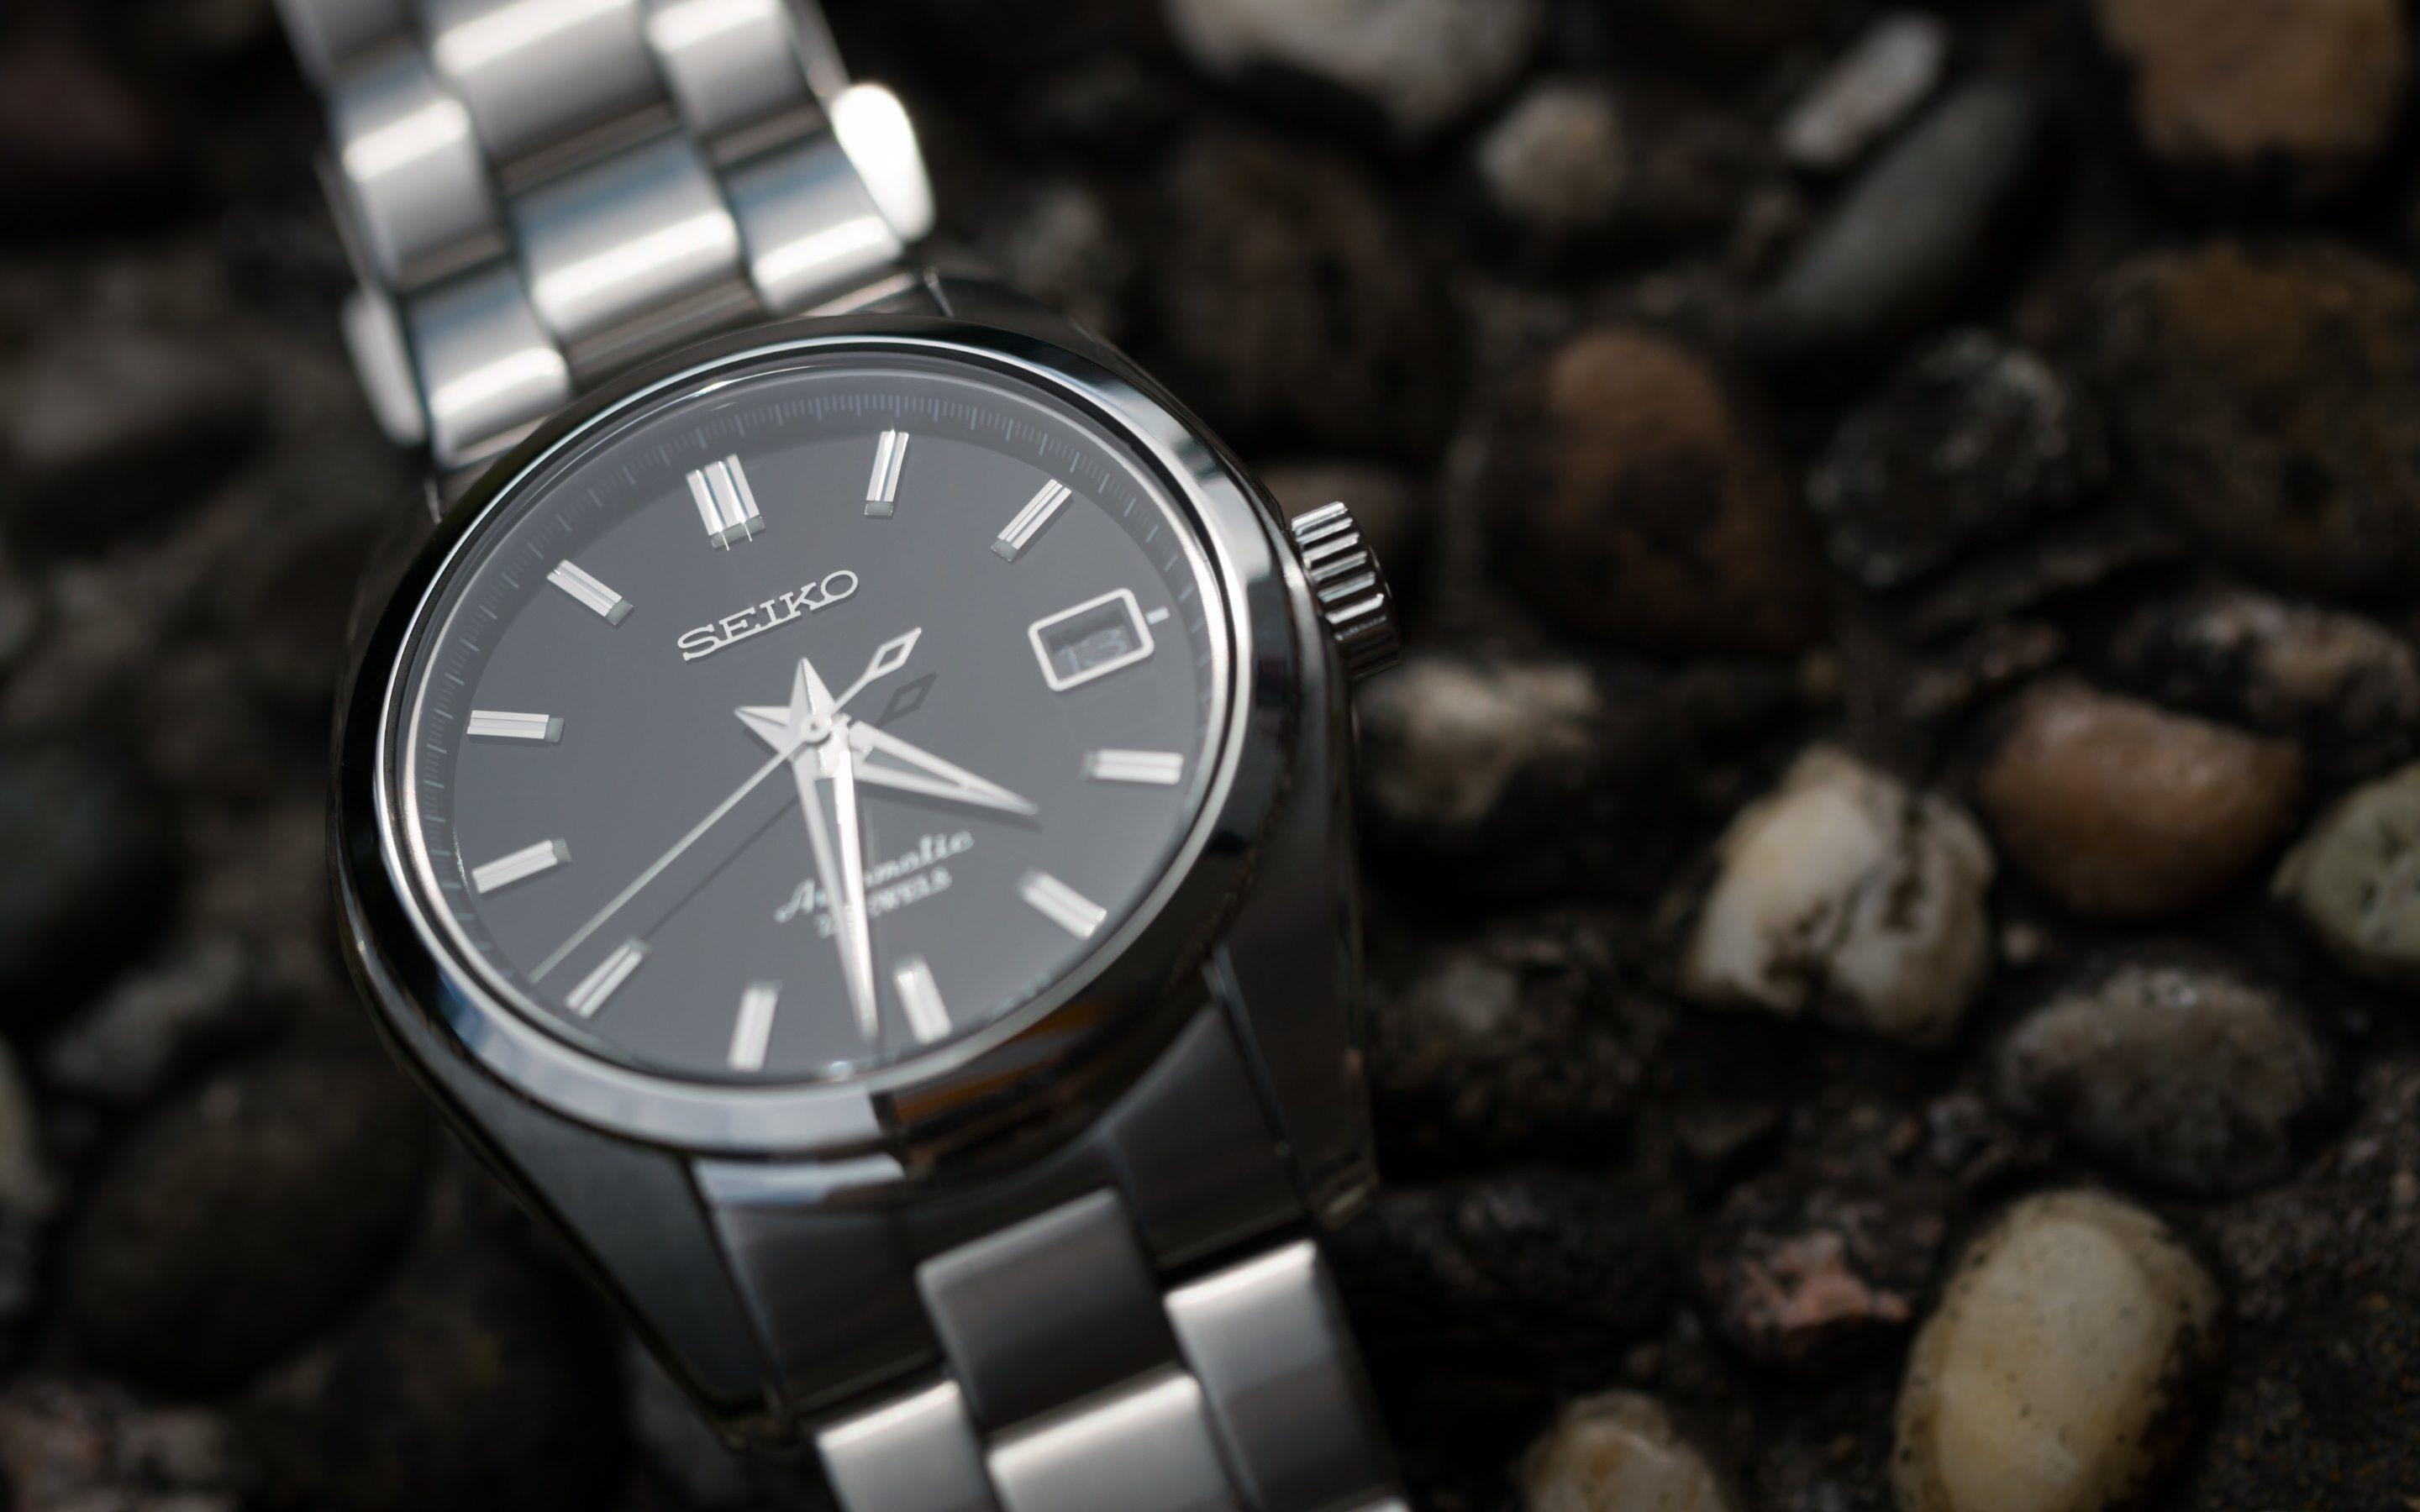 Introducing The Grand Seiko 60th Anniversary Limited Edition Professional  Diver's 600M SLGA001 Watch – WristReview.com – Featuring Watch Reviews,  Critiques, Reports & News